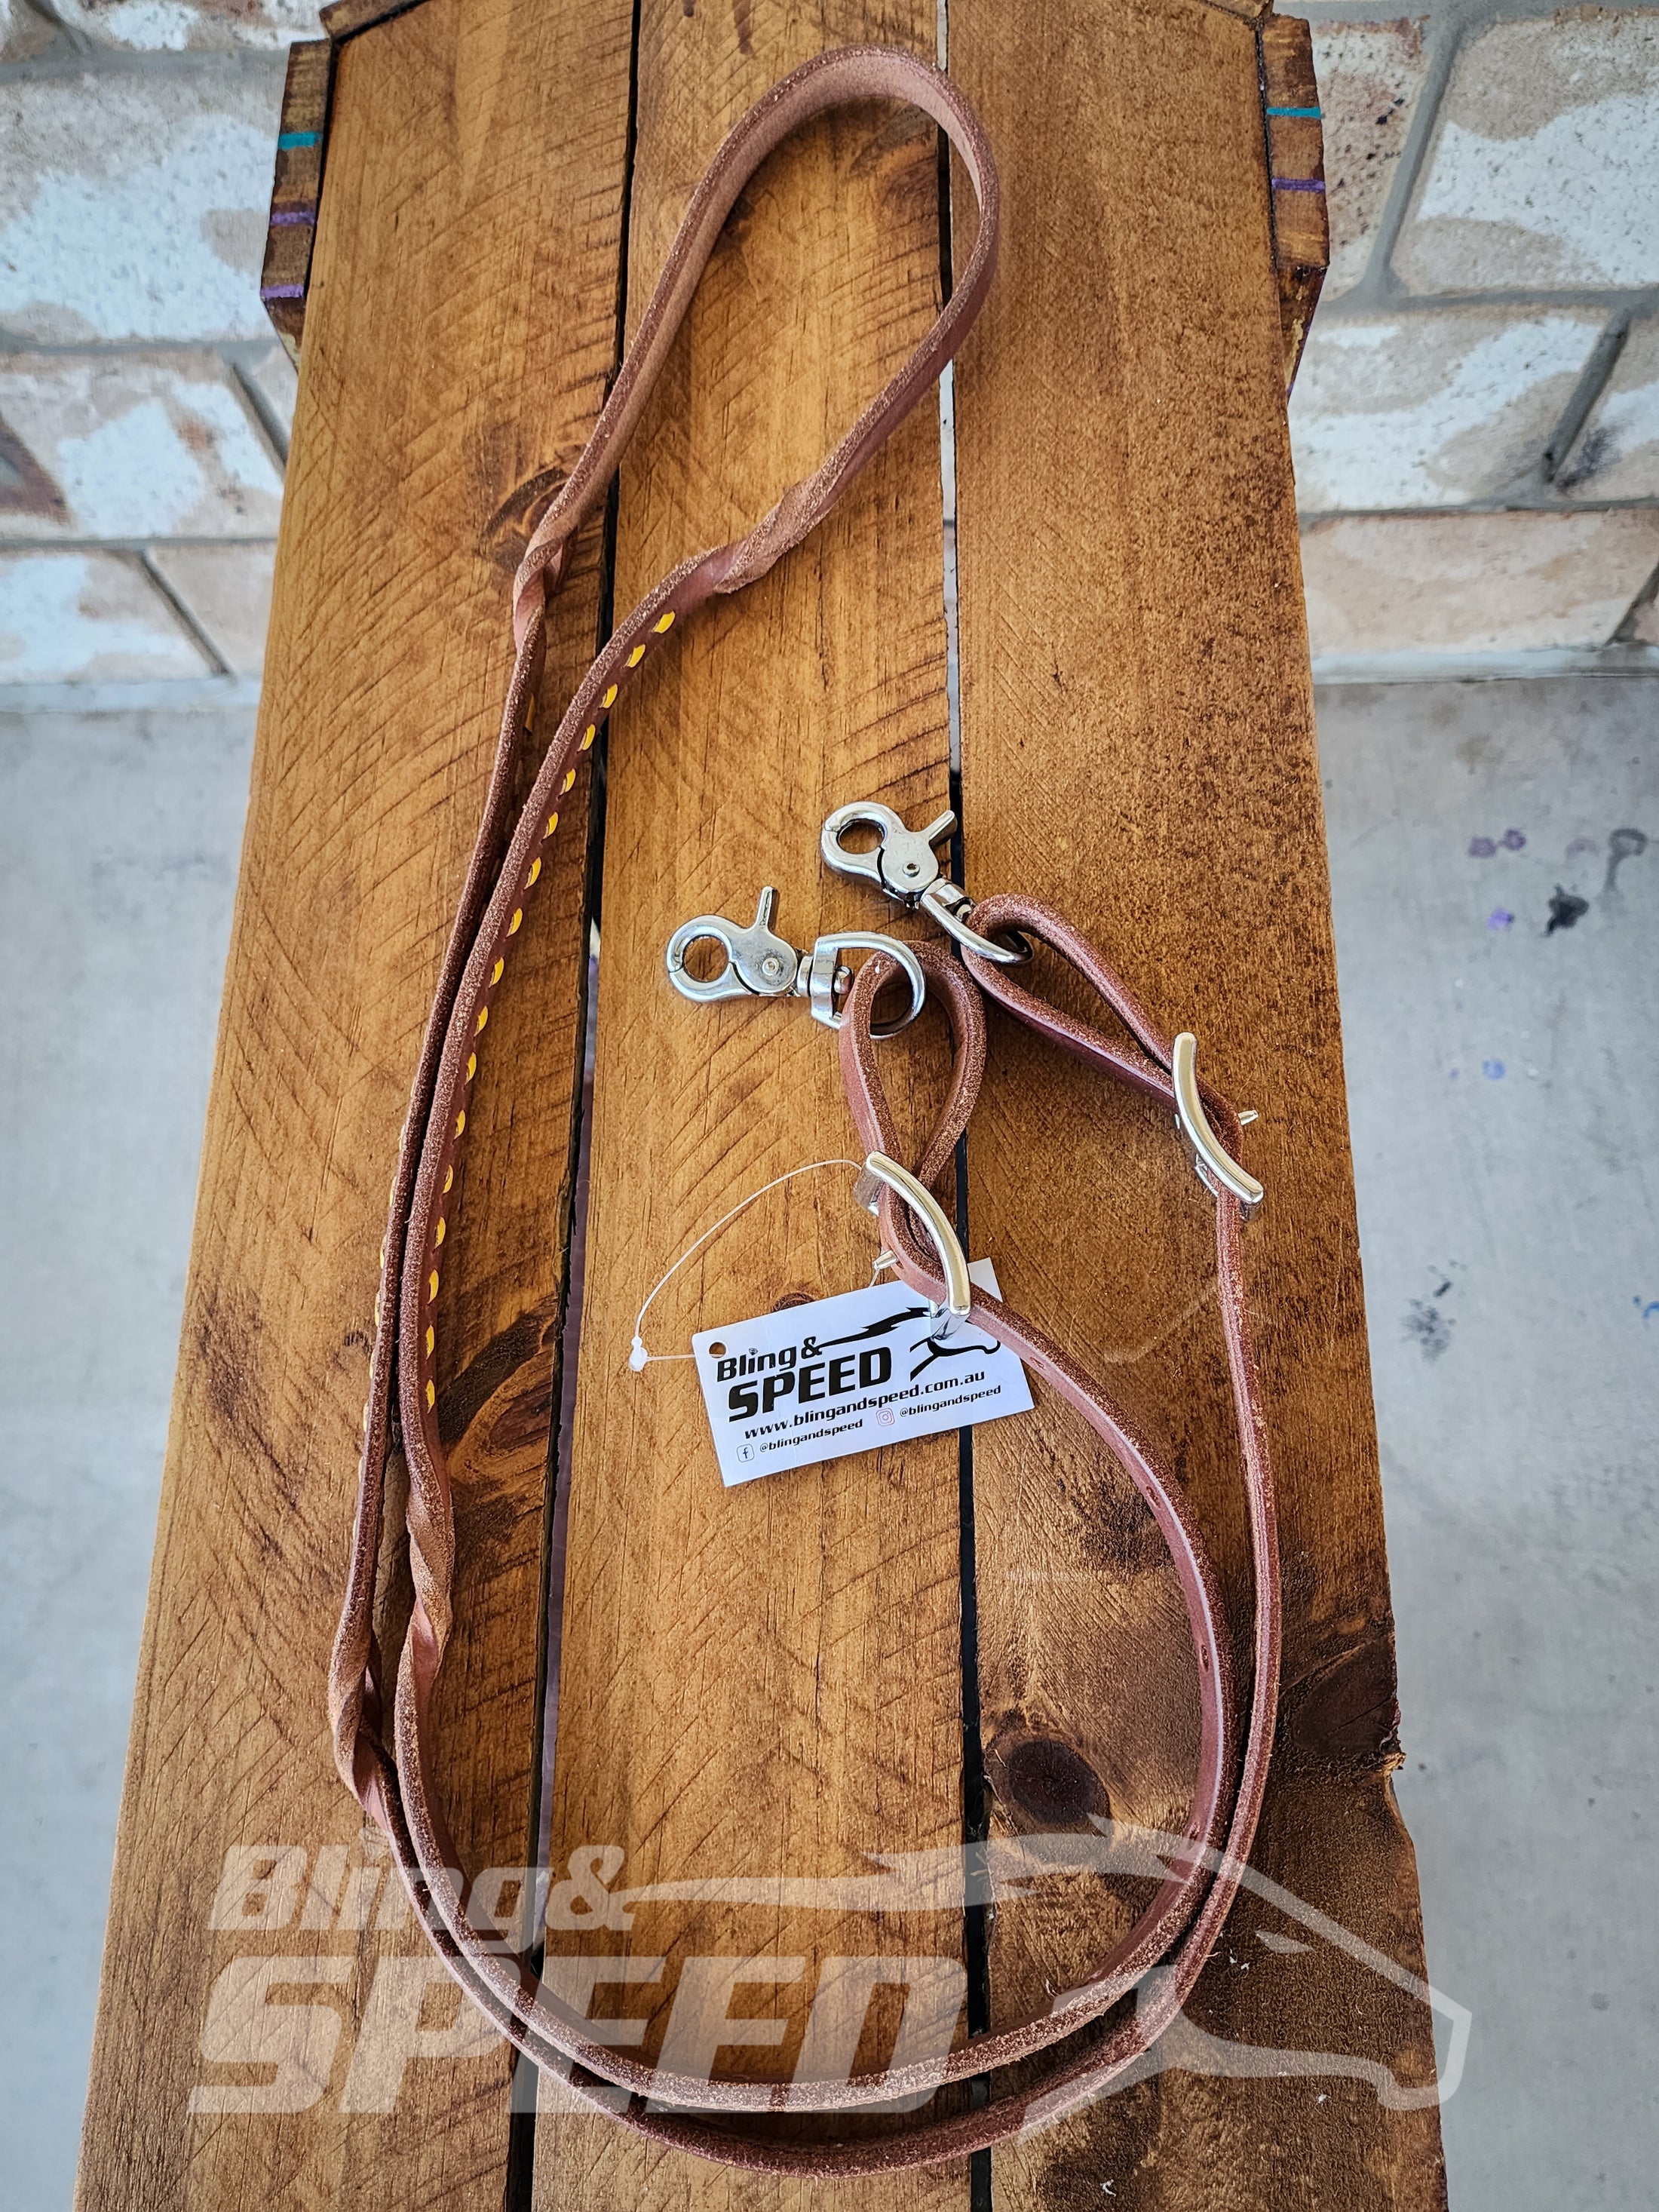 Bling & Speed Twisted Bloodknot Buckstitched Barrel Reins - Yellow (7977758523630)